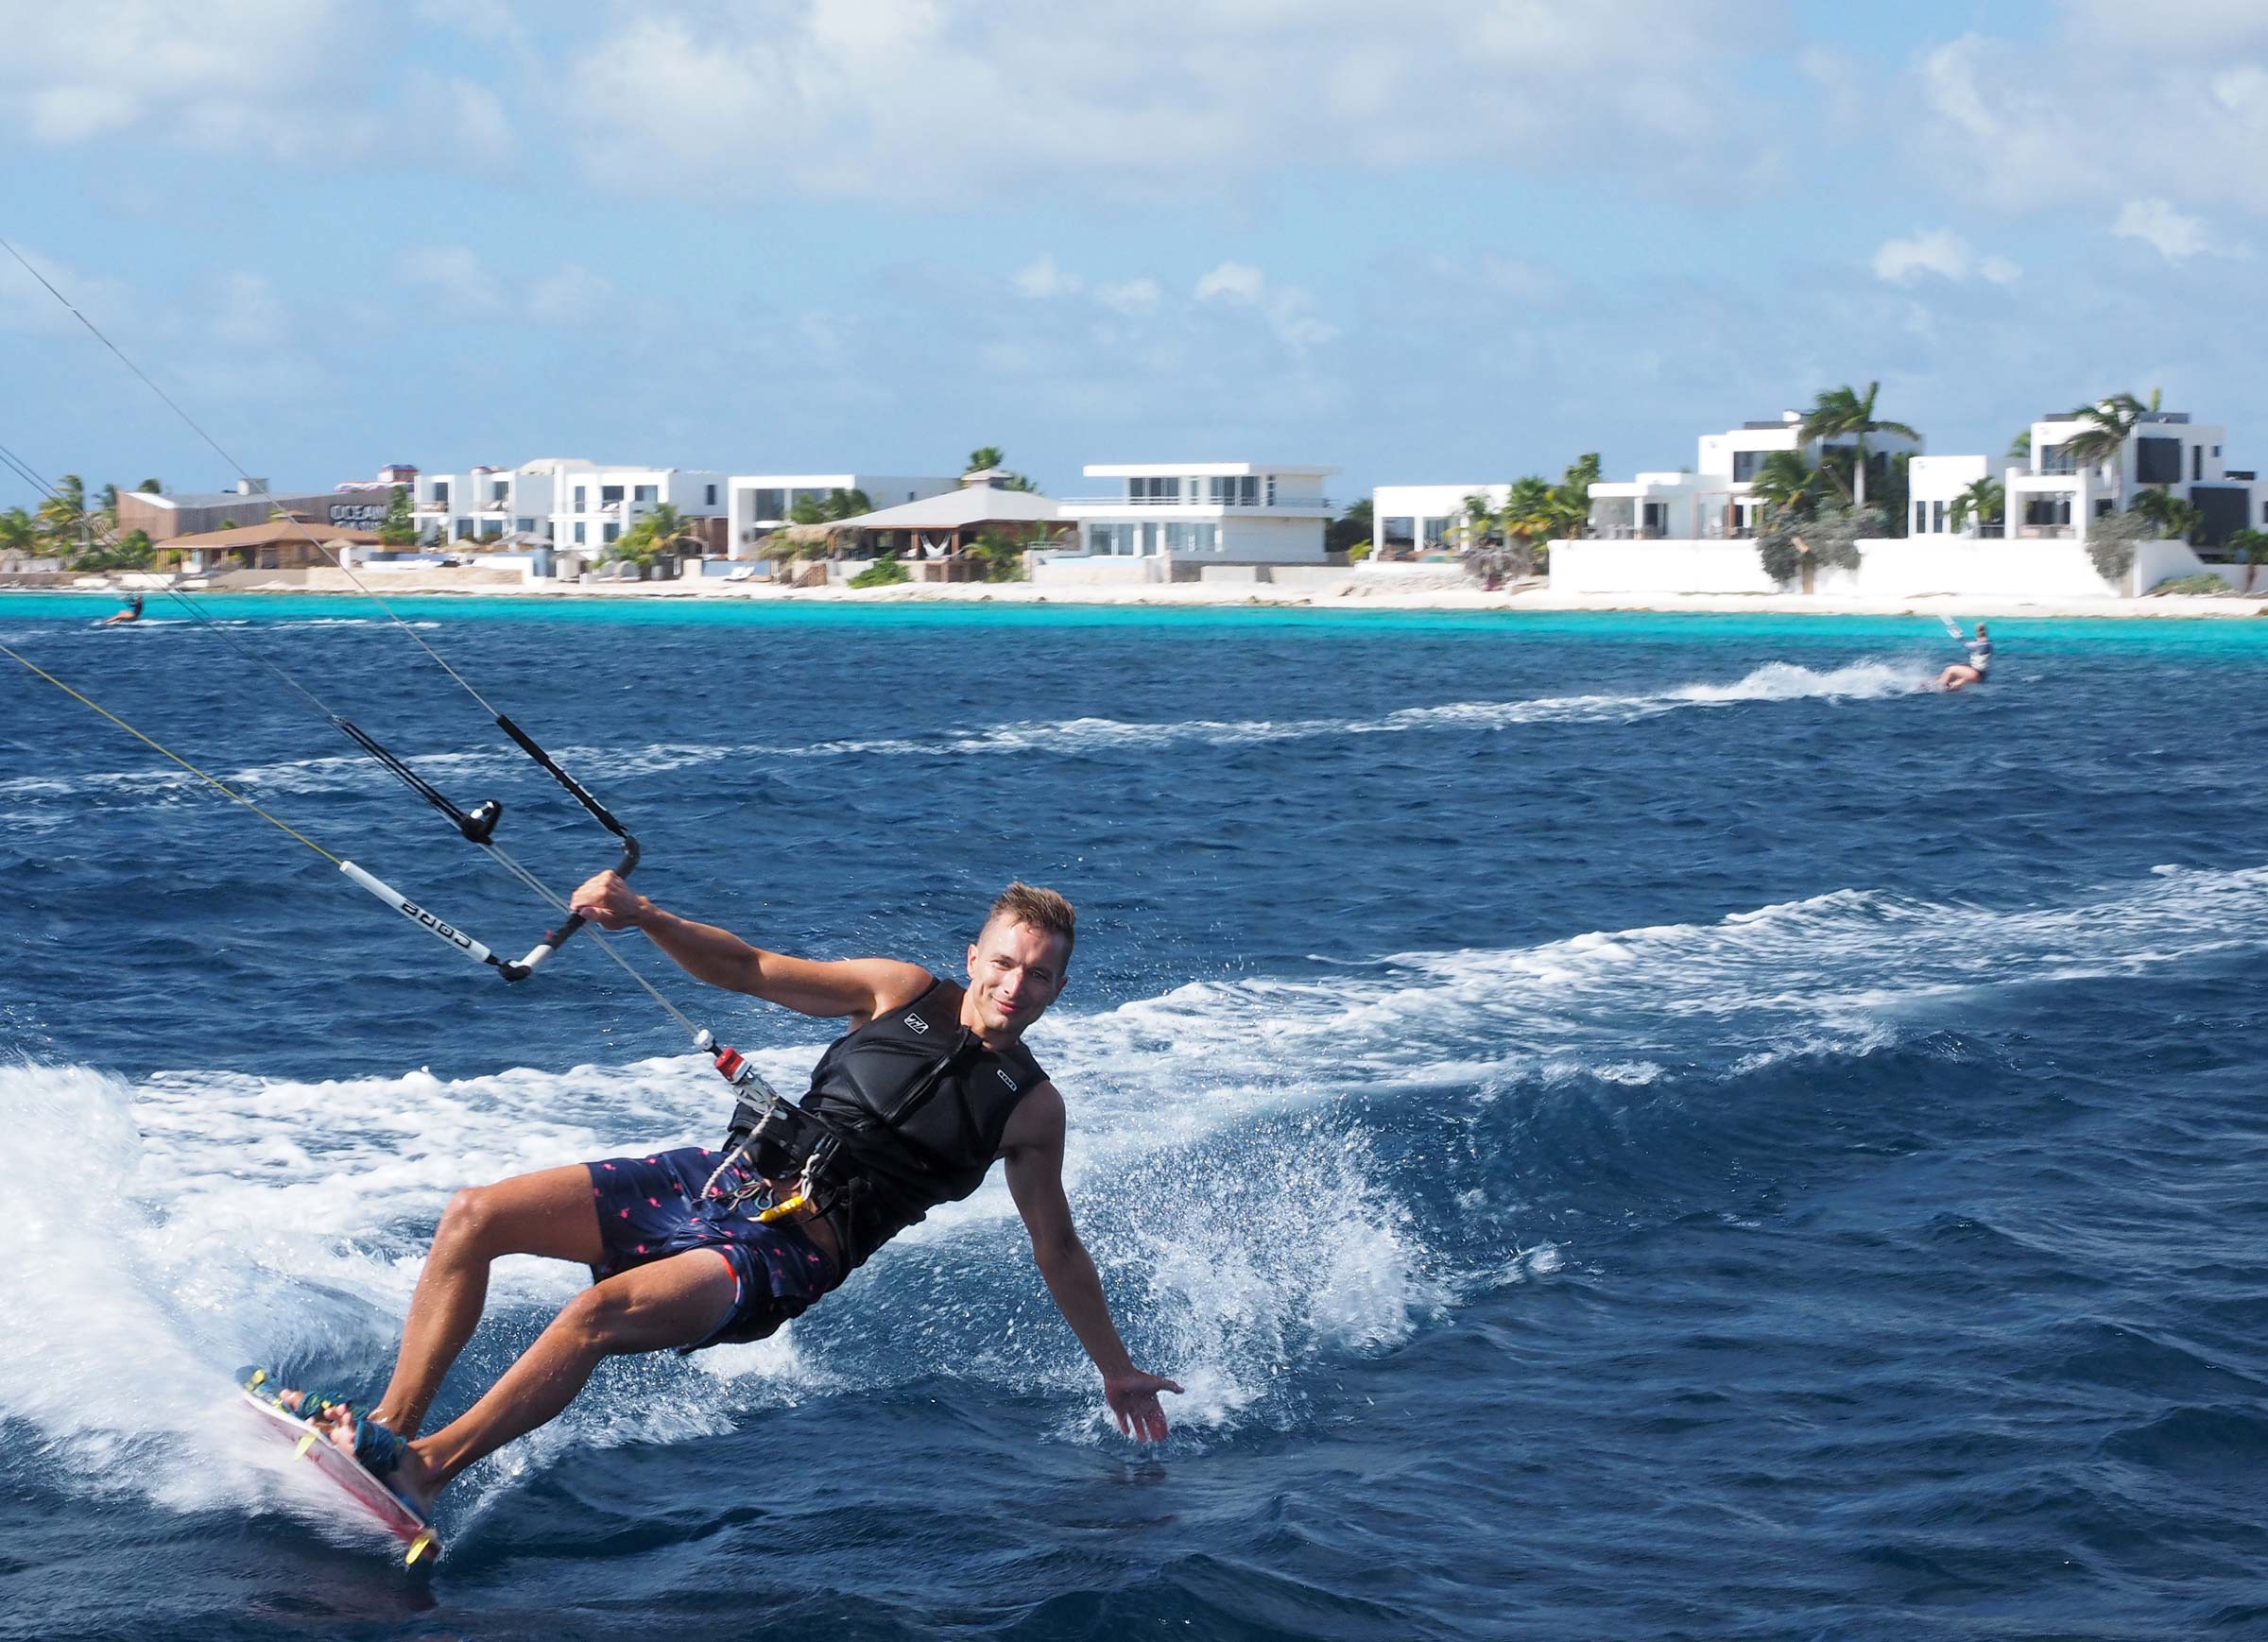 Bonaire is the one of the best kitesurfing spots in the world. Bonaire is twintip and witefoil heaven.